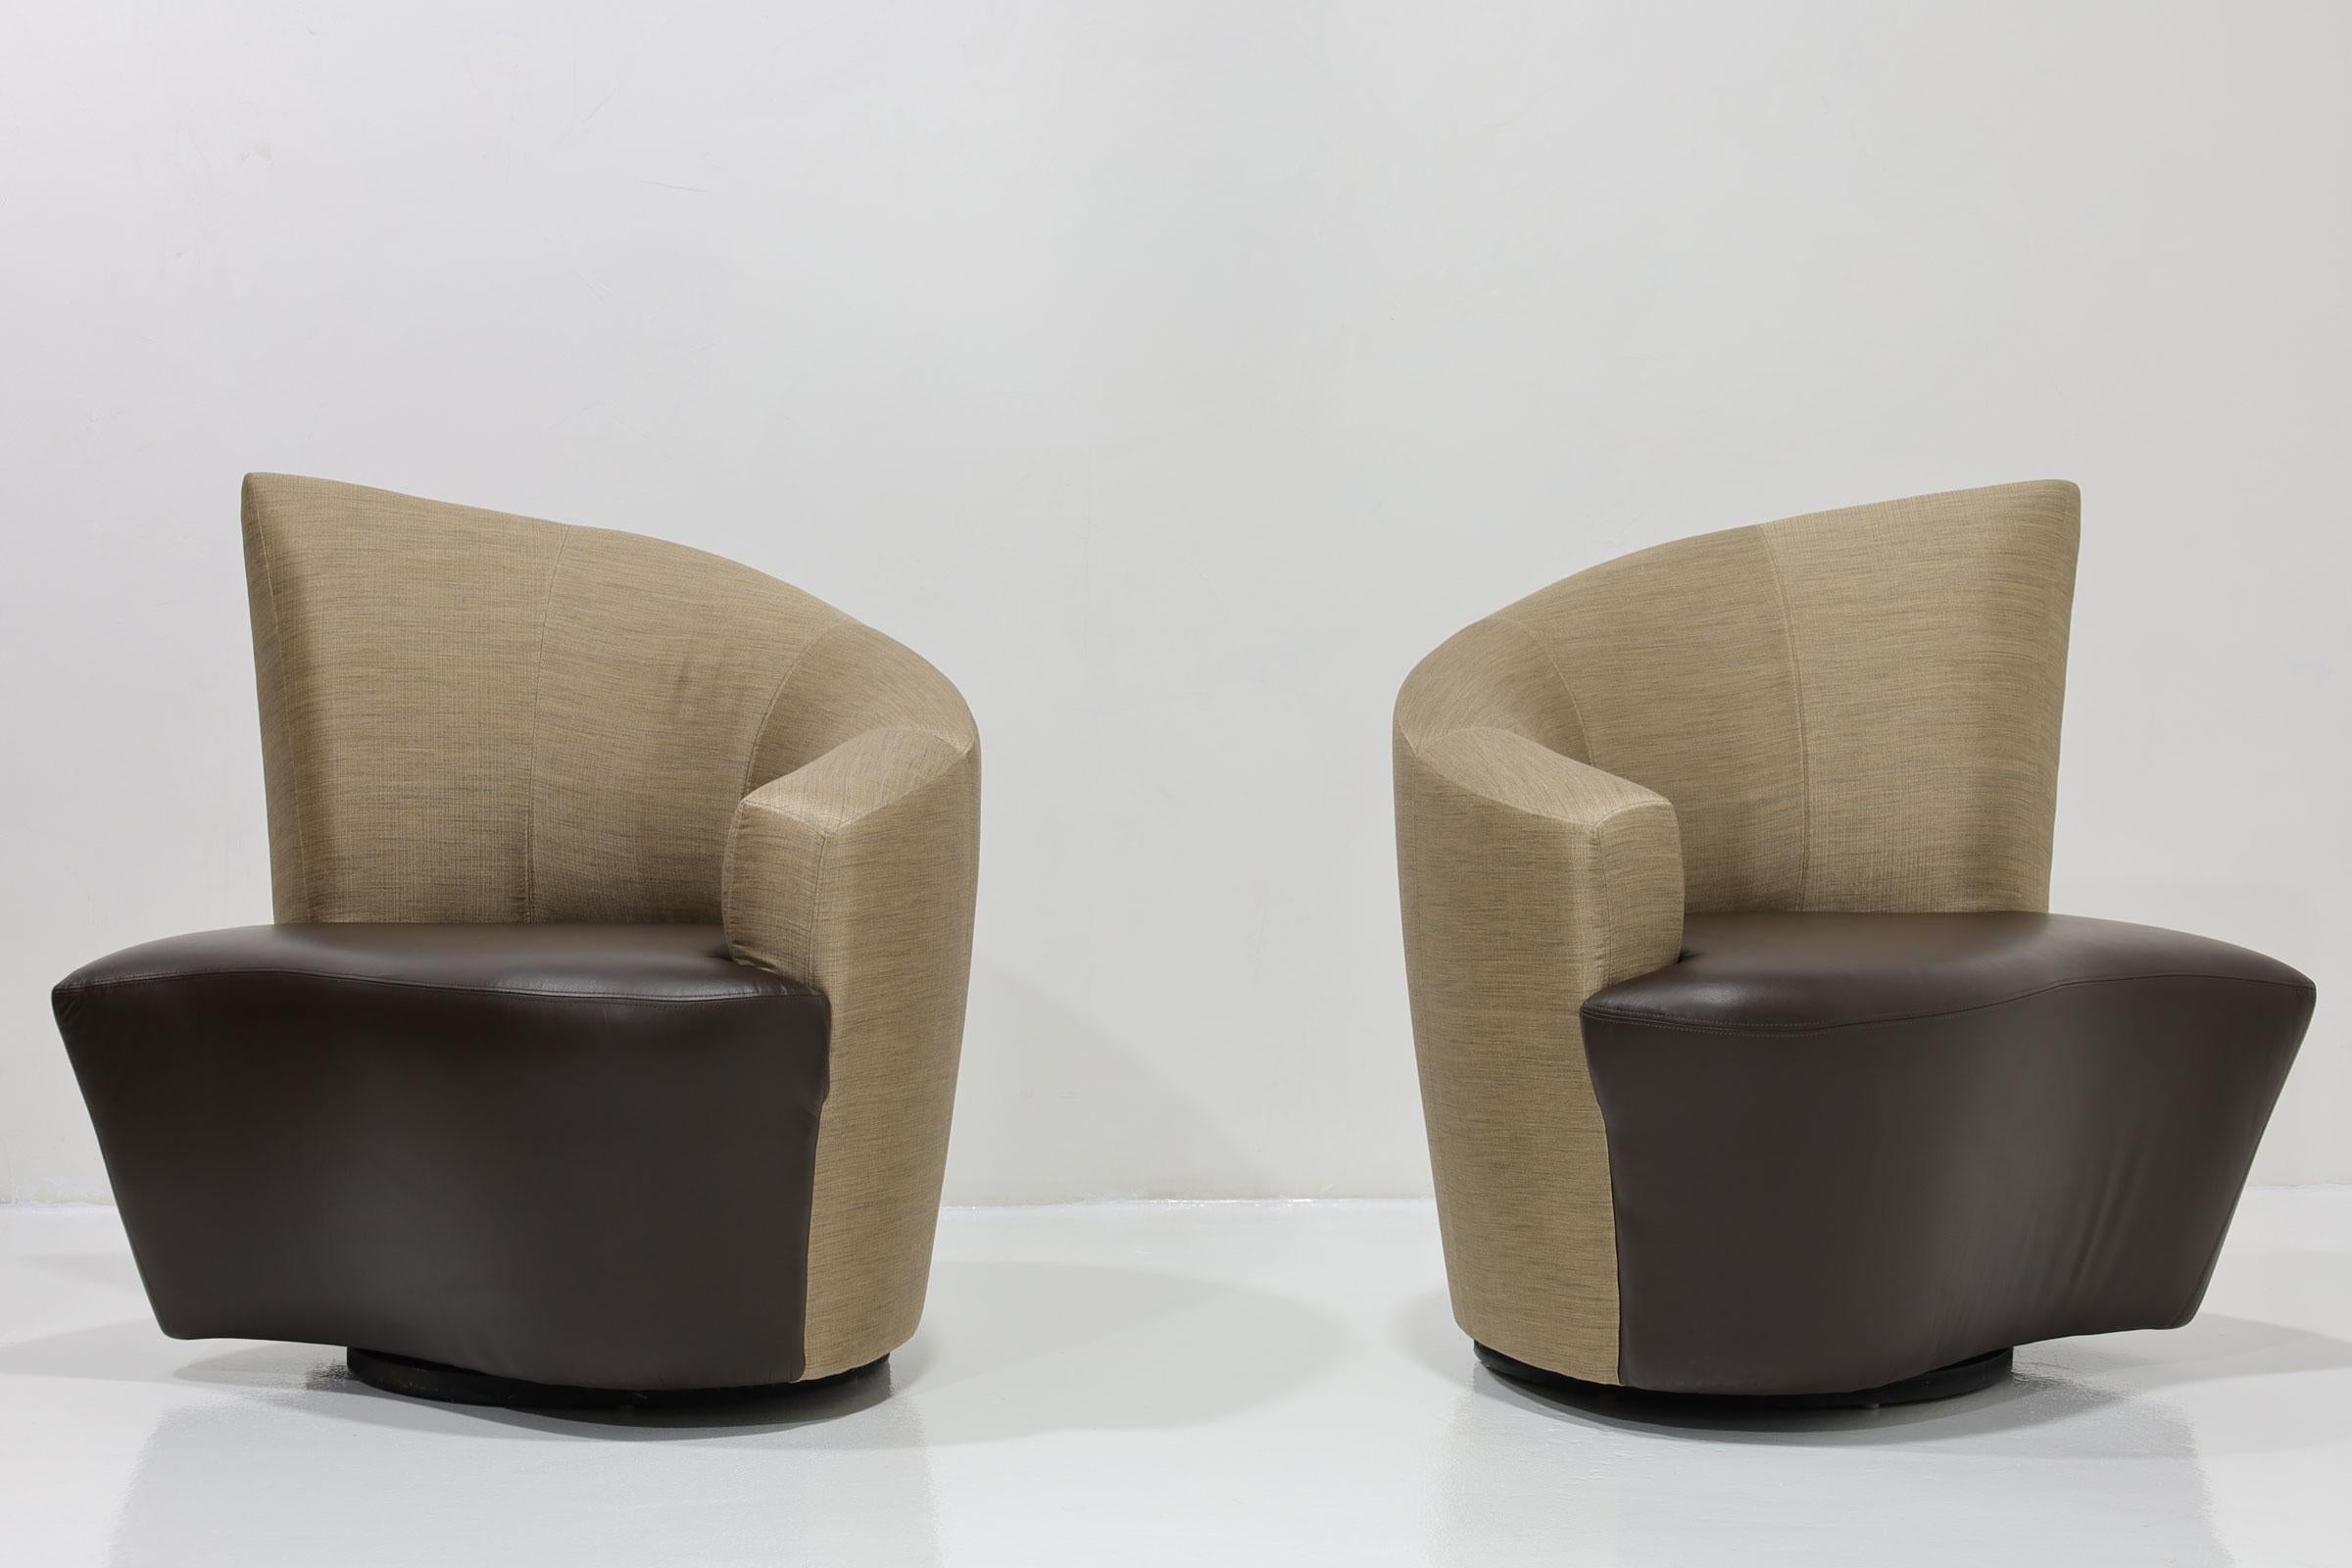 A Post Modern pair of Vladimir Kagan Bilbao swivel chairs upholstered in silk and leather circa 1990s. Enamored with Bilbao, Spain, the Bilbao chair is a manifestation of Vladimir Kagan's impressions from his time spent on holiday. He was especially